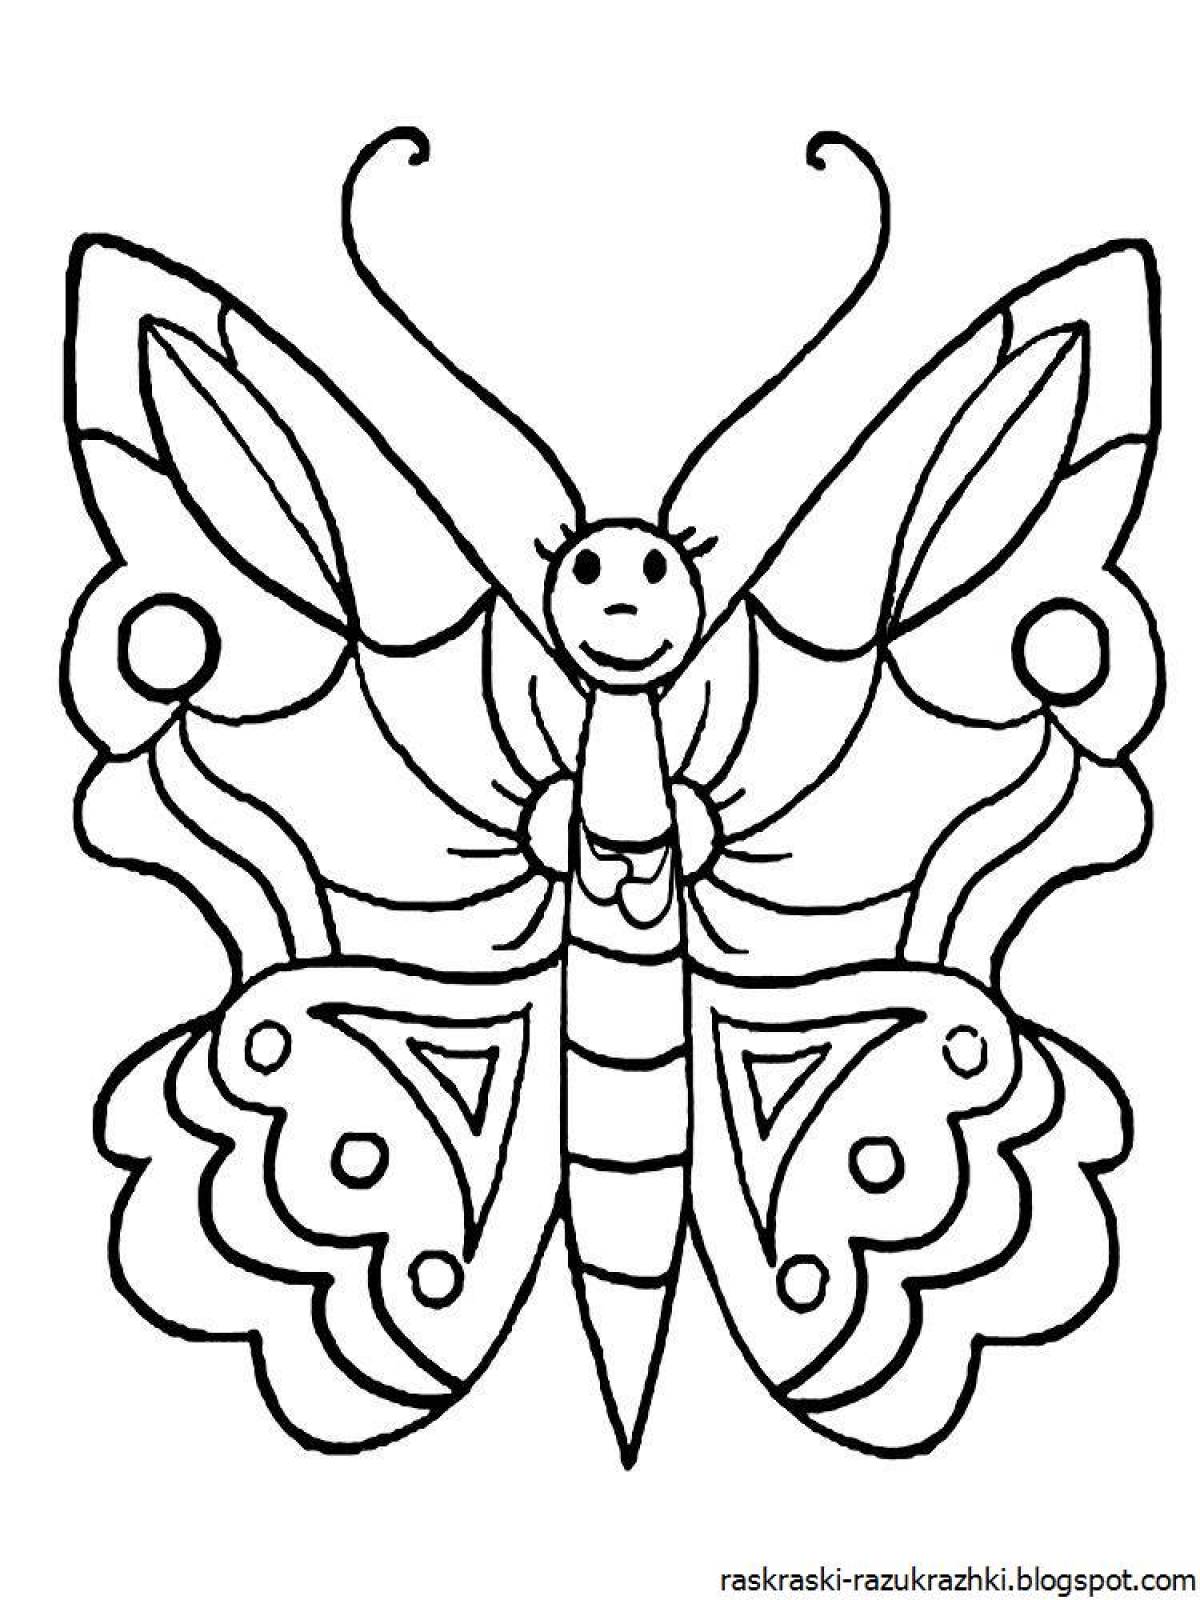 Silly serenohead coloring page